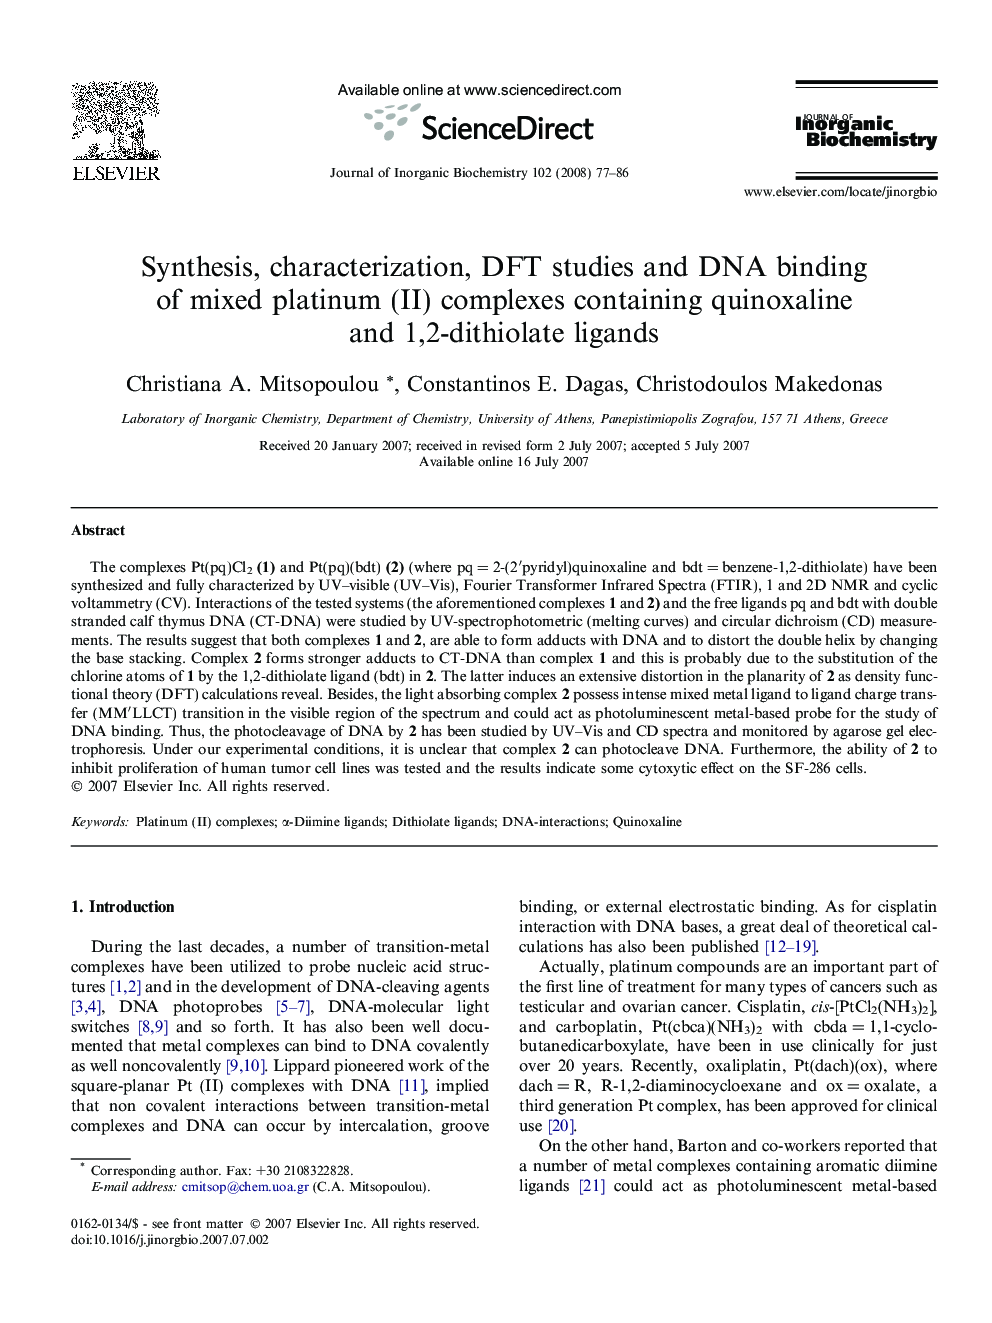 Synthesis, characterization, DFT studies and DNA binding of mixed platinum (II) complexes containing quinoxaline and 1,2-dithiolate ligands